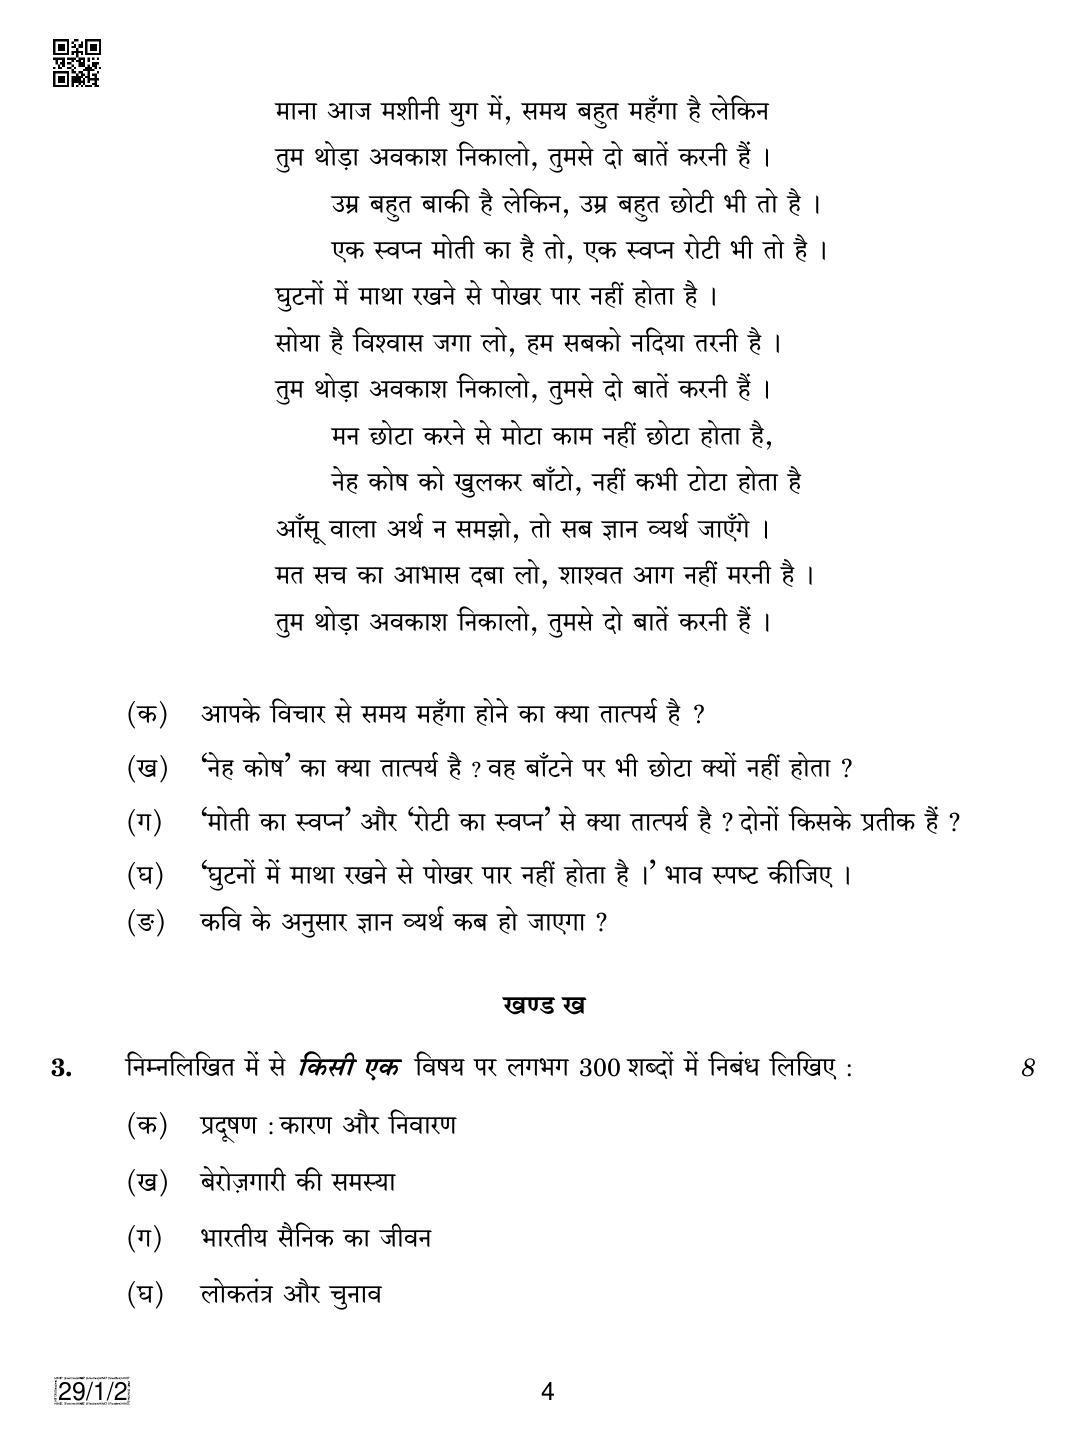 CBSE Class 12 29-1-2 HINDI ELECTIVE 2019 Compartment Question Paper - Page 4